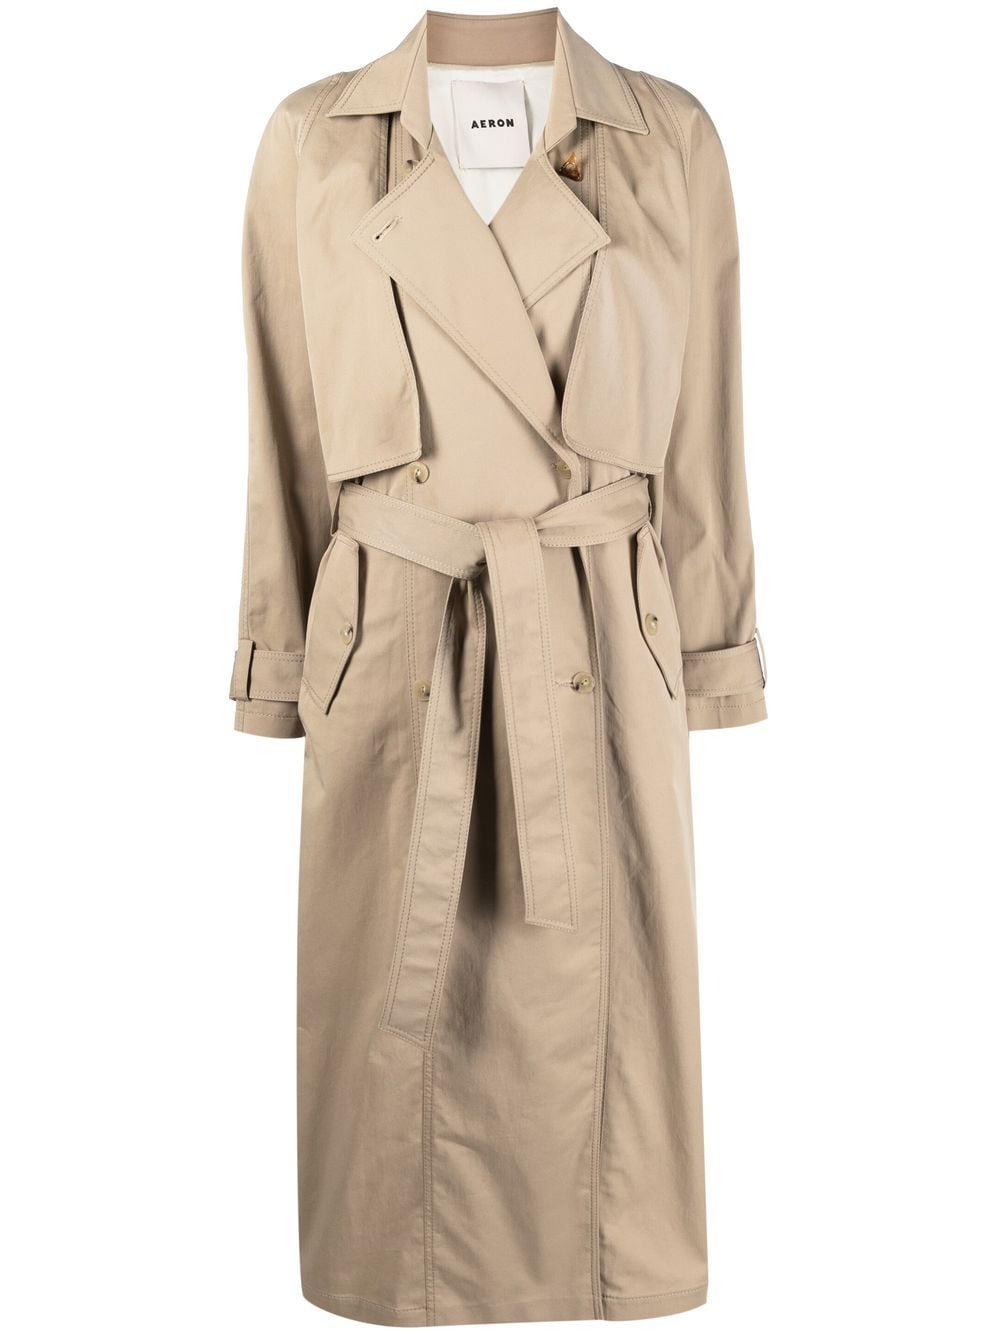 Aeron Neutral Belted Trench Coat In Neutrals